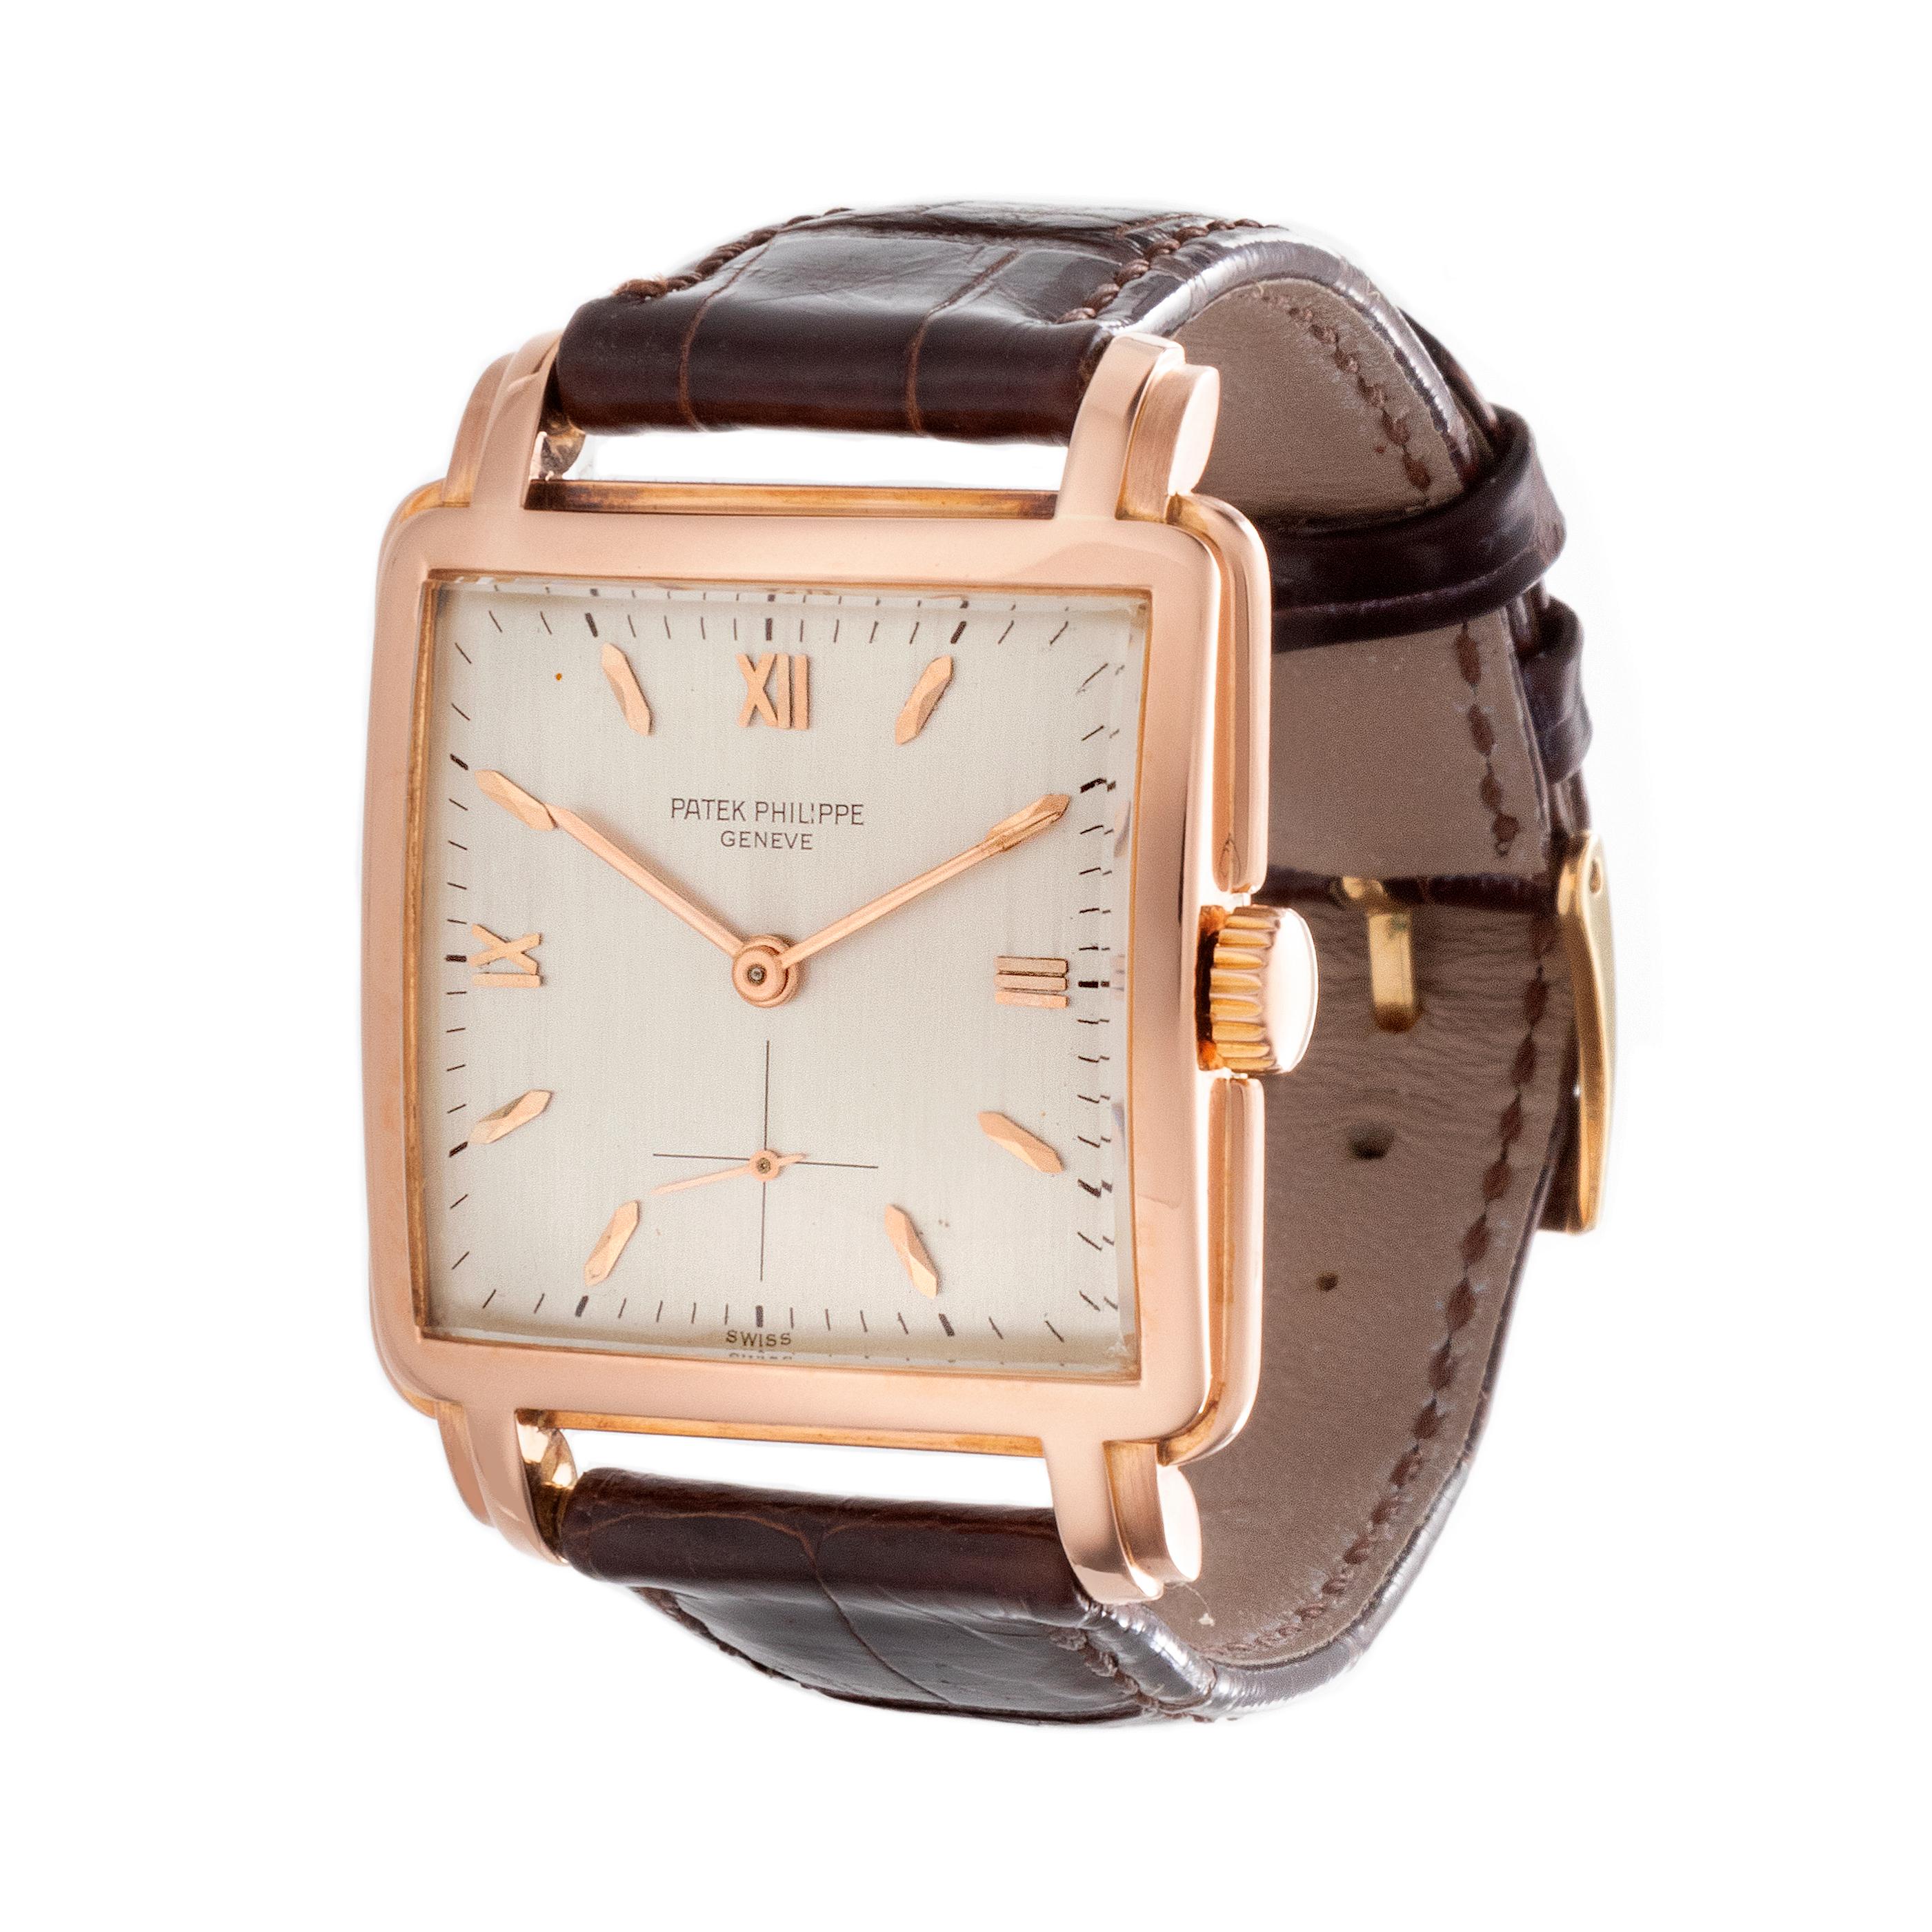 Patek Philippe 2436R, 18 Karat rose gold large square 40 x 30 mm wristwatch, with Step Bezel and Large Fancy Lugs. Fitted with a 10